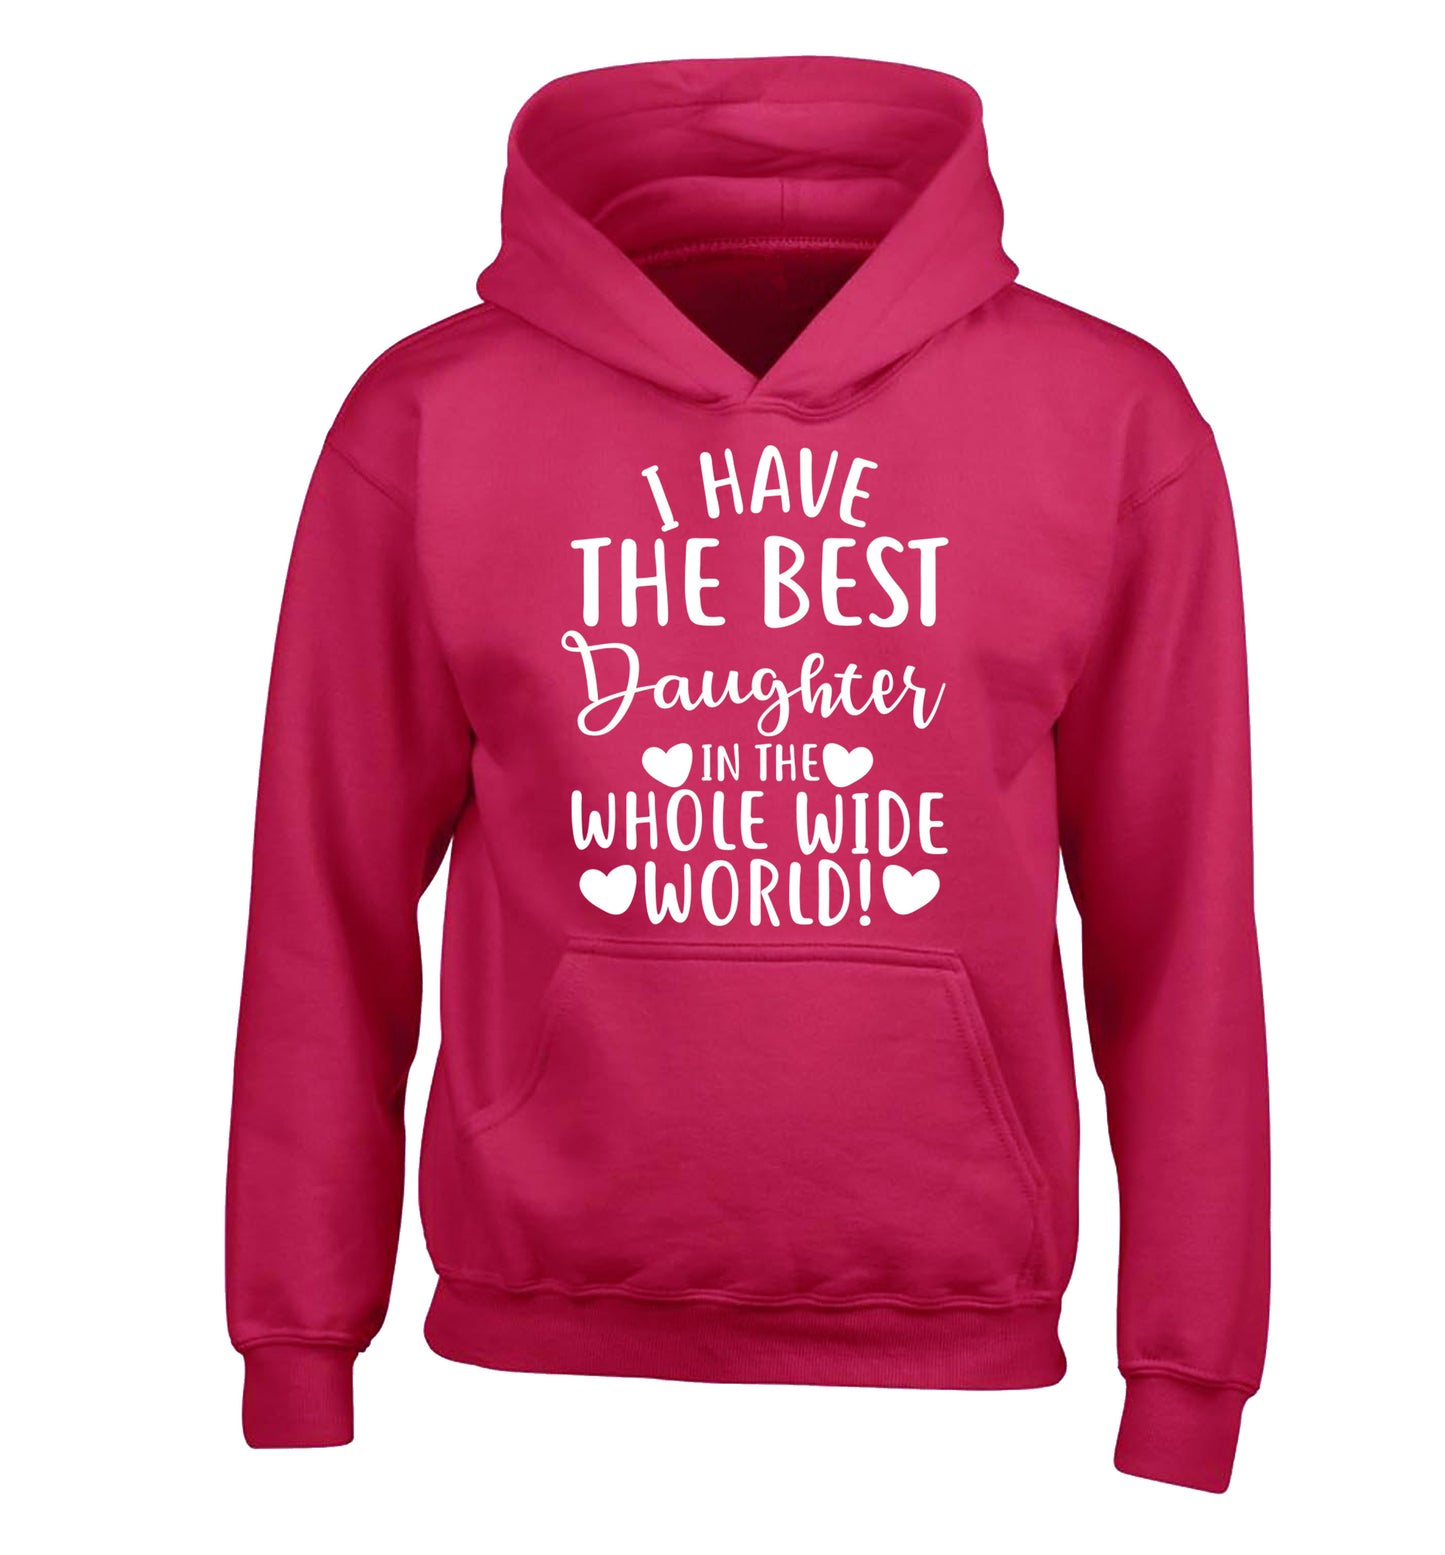 I have the best daughter in the whole wide world! children's pink hoodie 12-13 Years